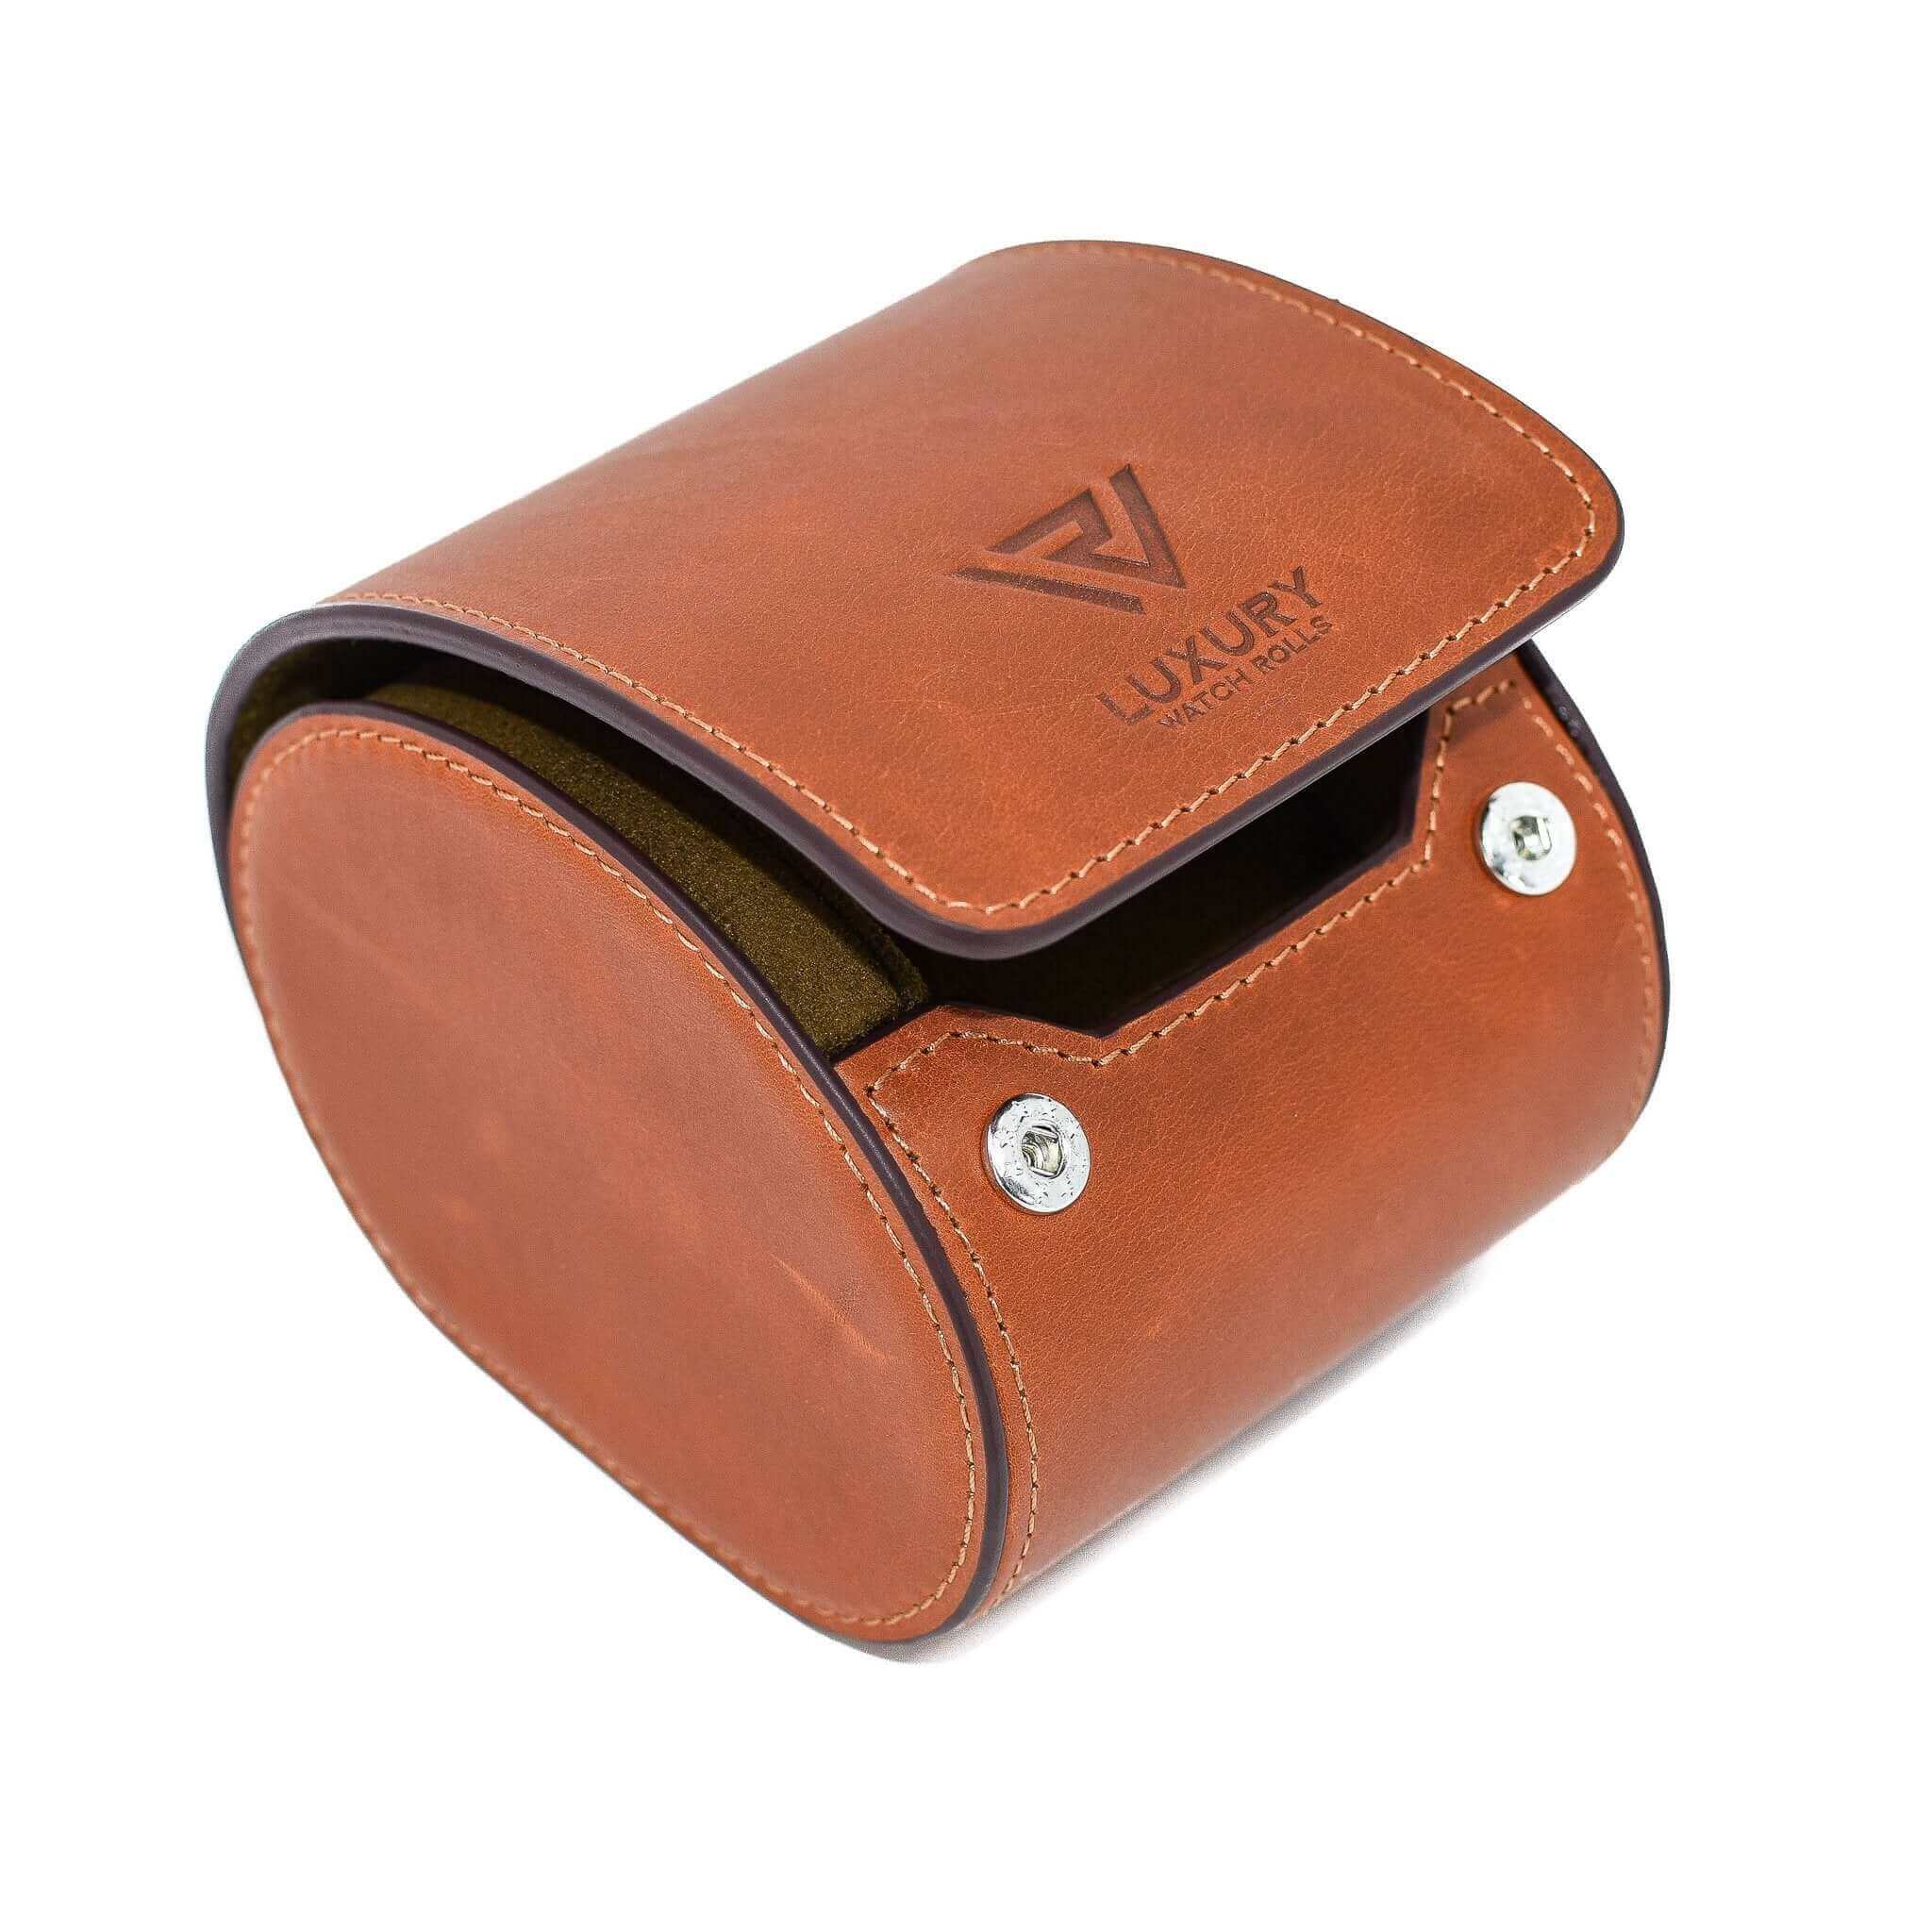 A side view showing the inside of Luxury Watch Roll's single slot, vintage brown leather watch roll for one watch storage.